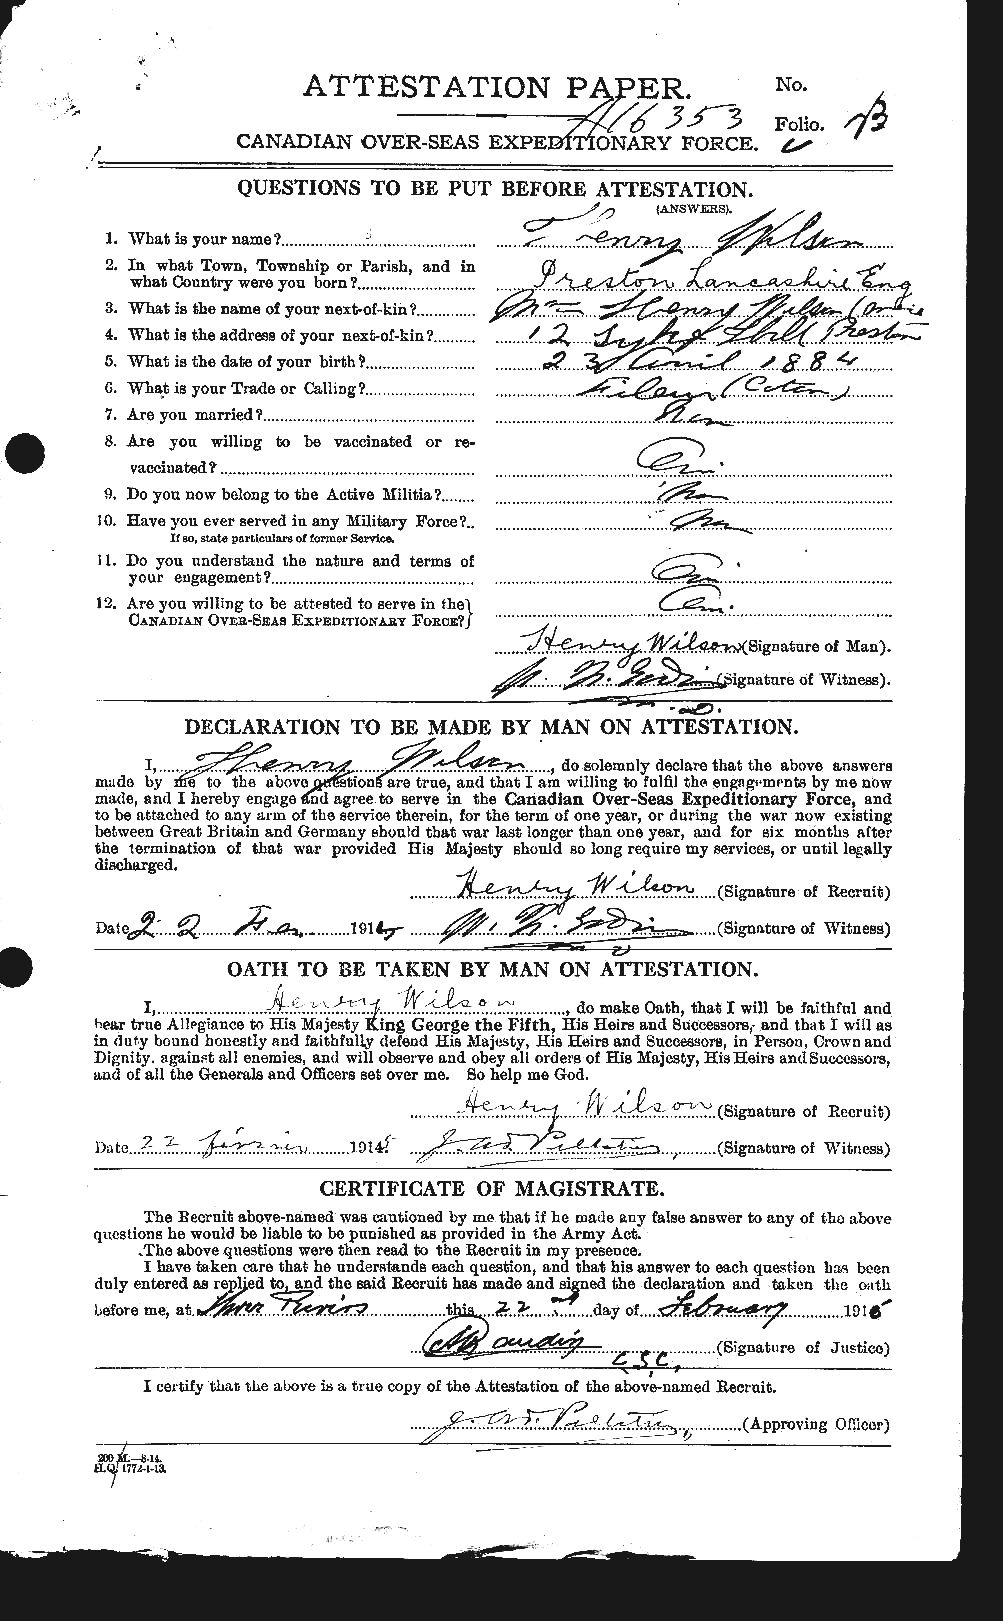 Personnel Records of the First World War - CEF 679508a